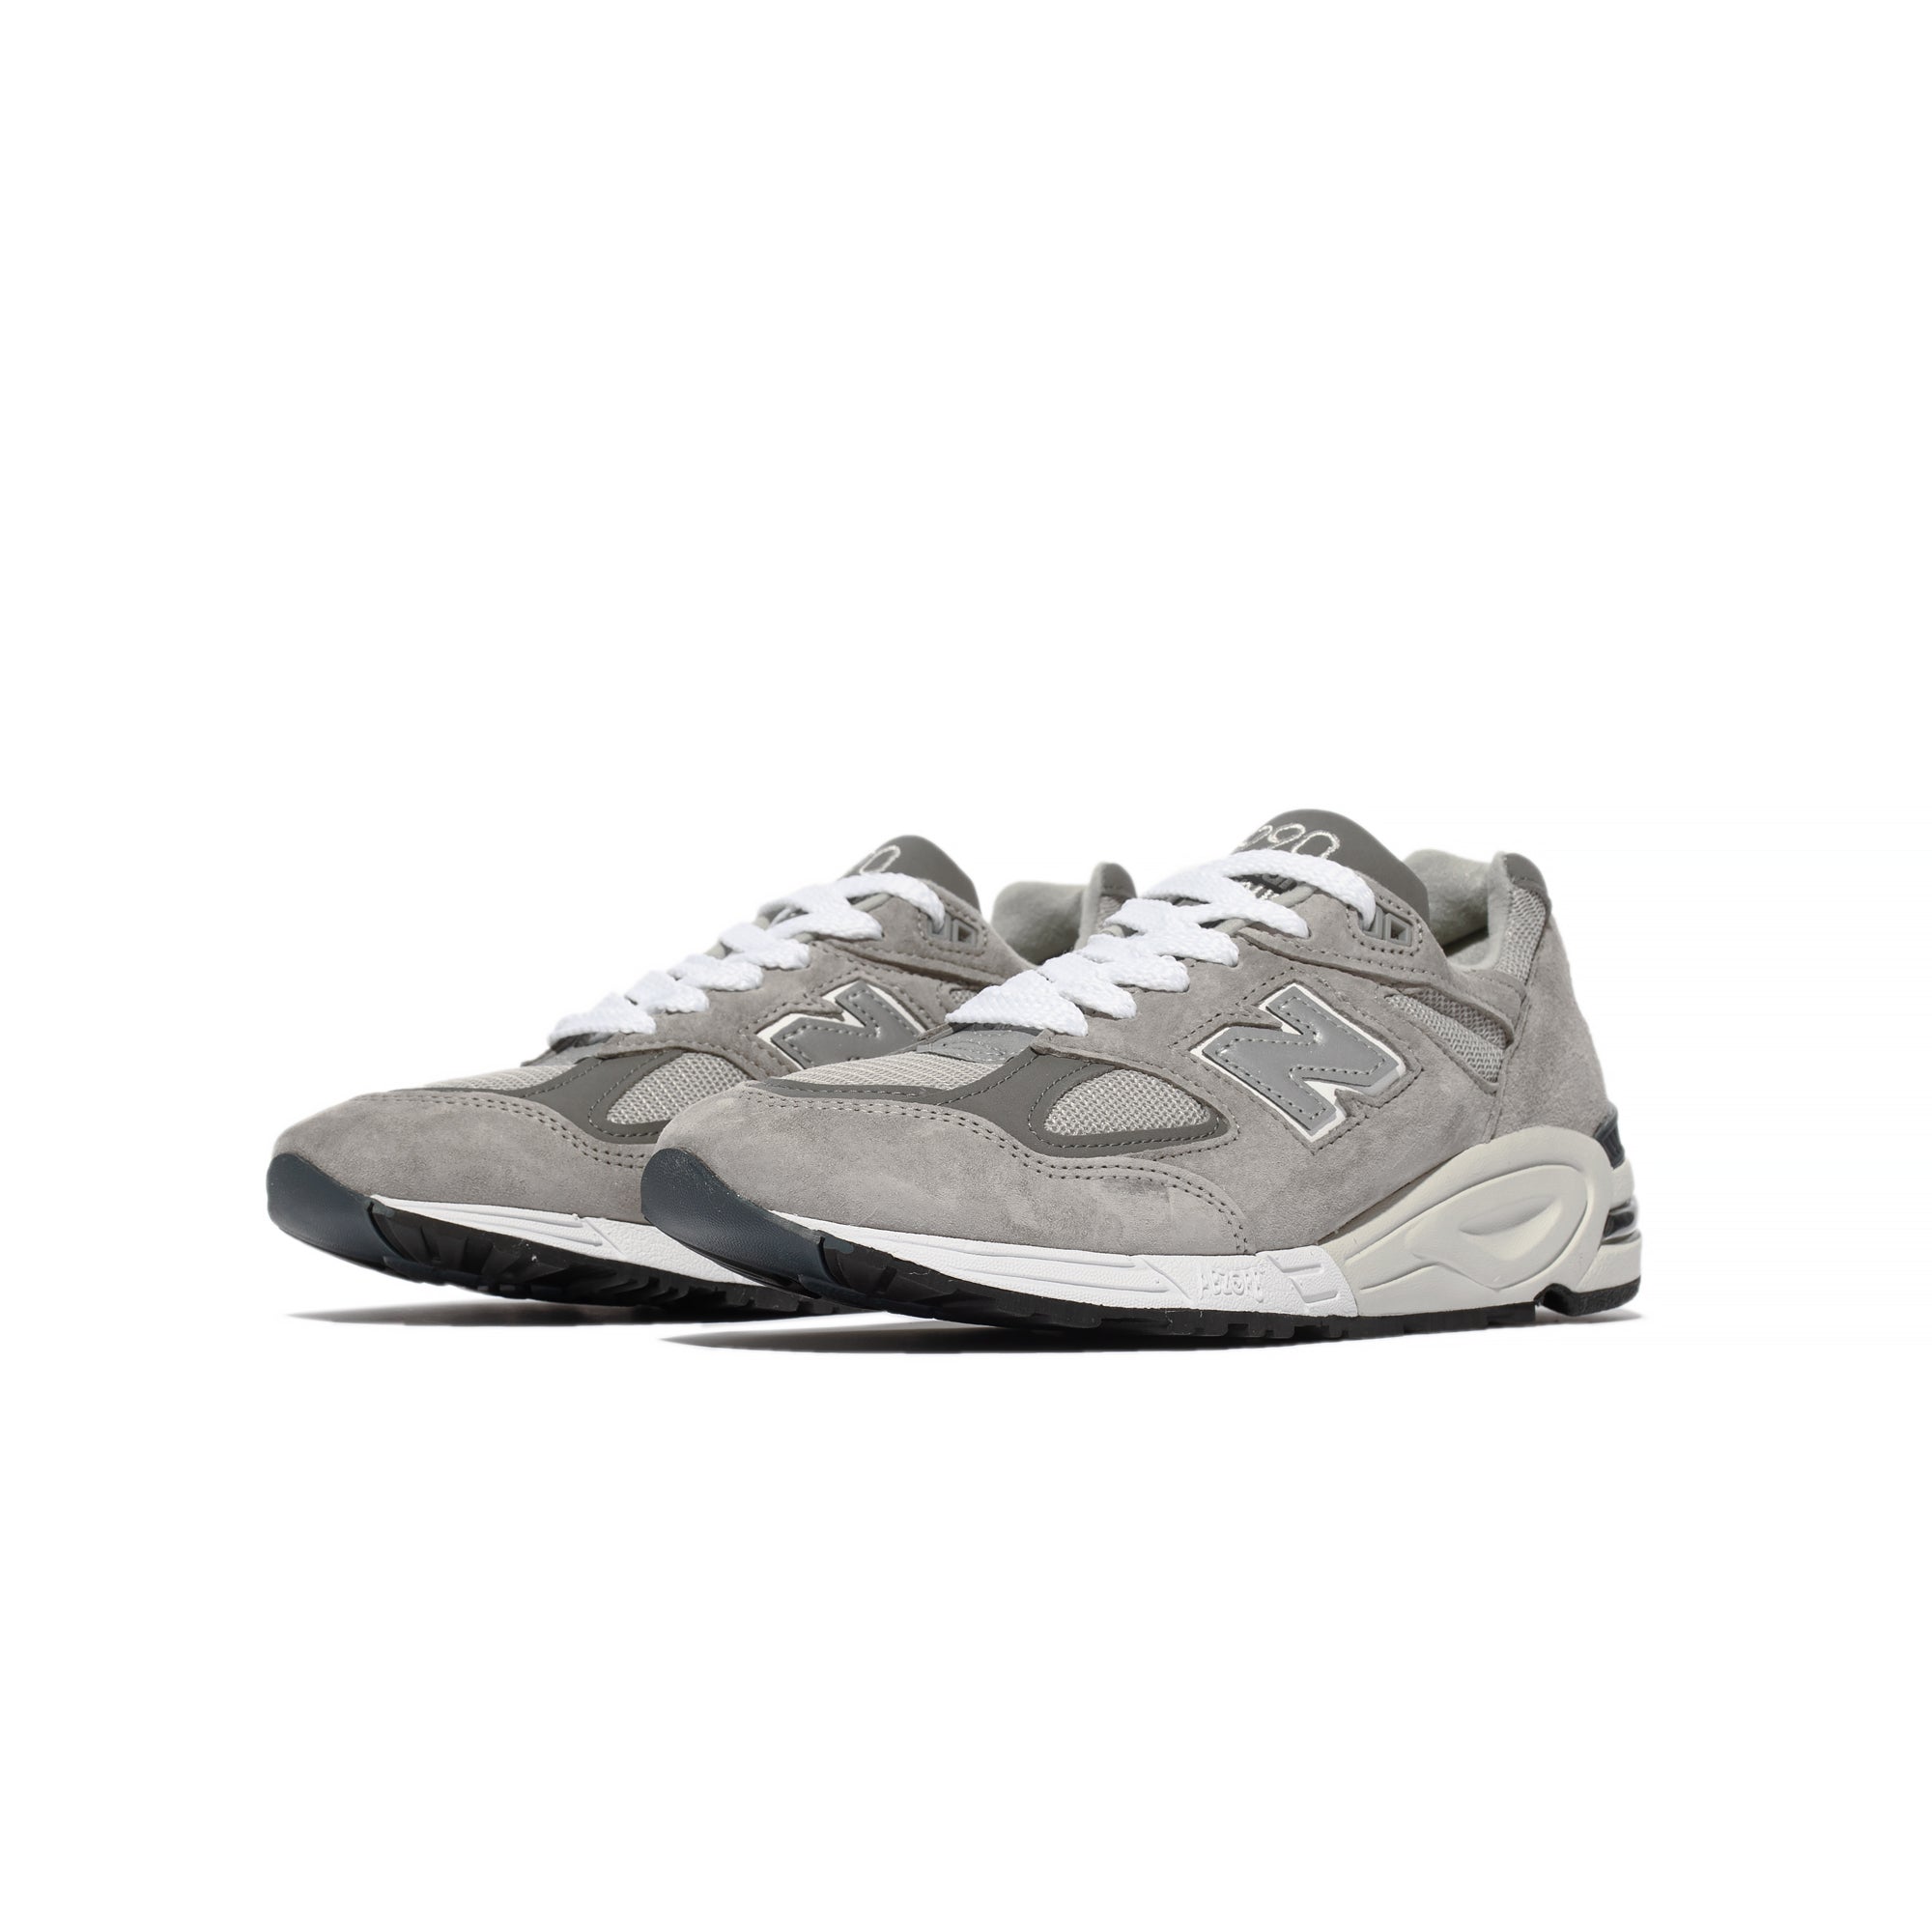 New Balance Mens Made In US 990v2 Shoes 'Grey'